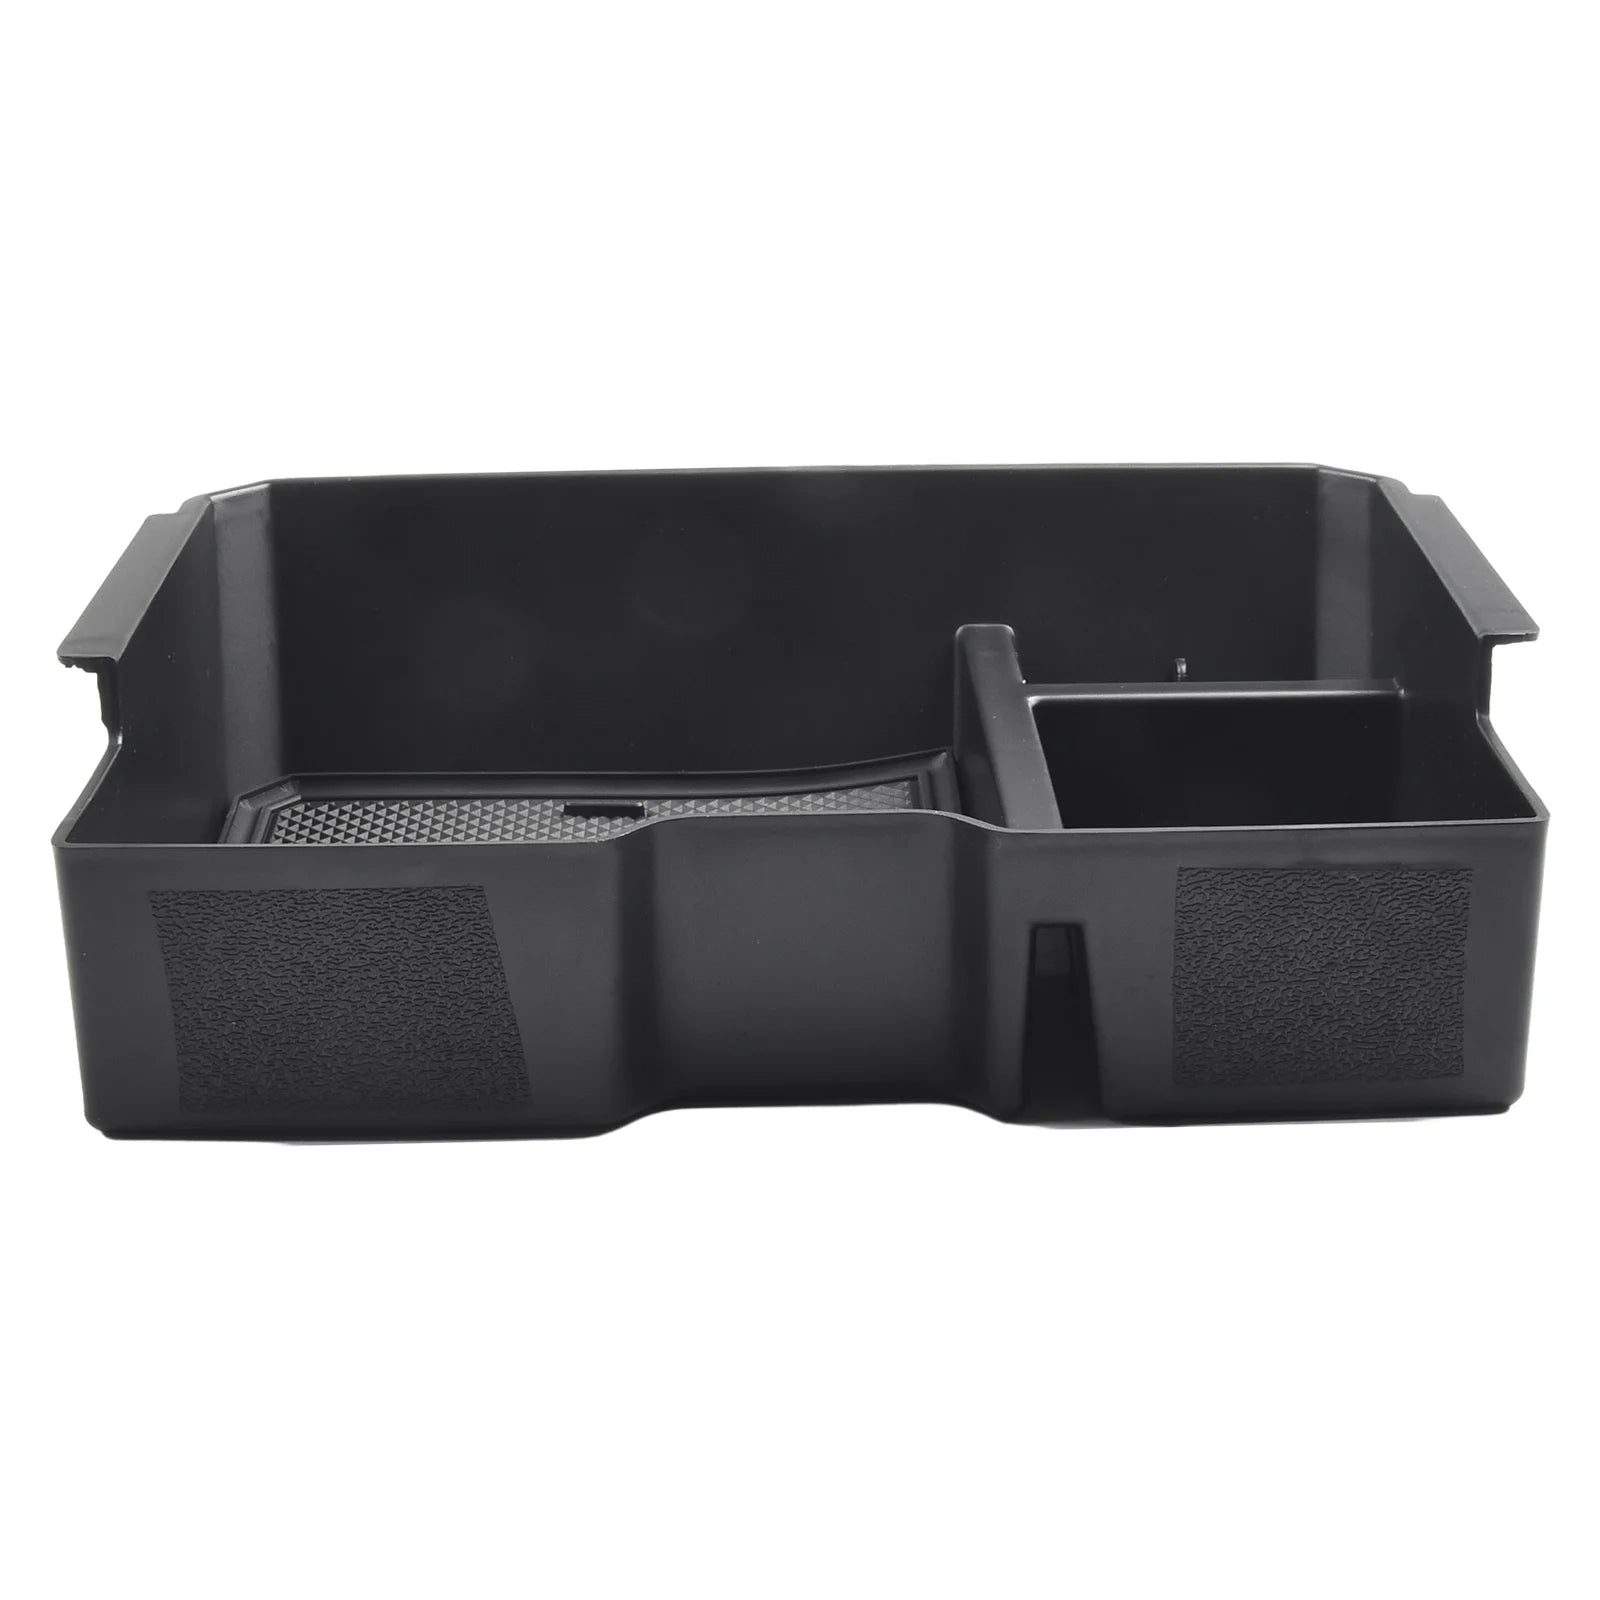 ABS Car Armrest Center Console Storage Box Tray Organizer ABS Plastic For Ford-Ranger 2023 Car Accessories  VehiDecors   